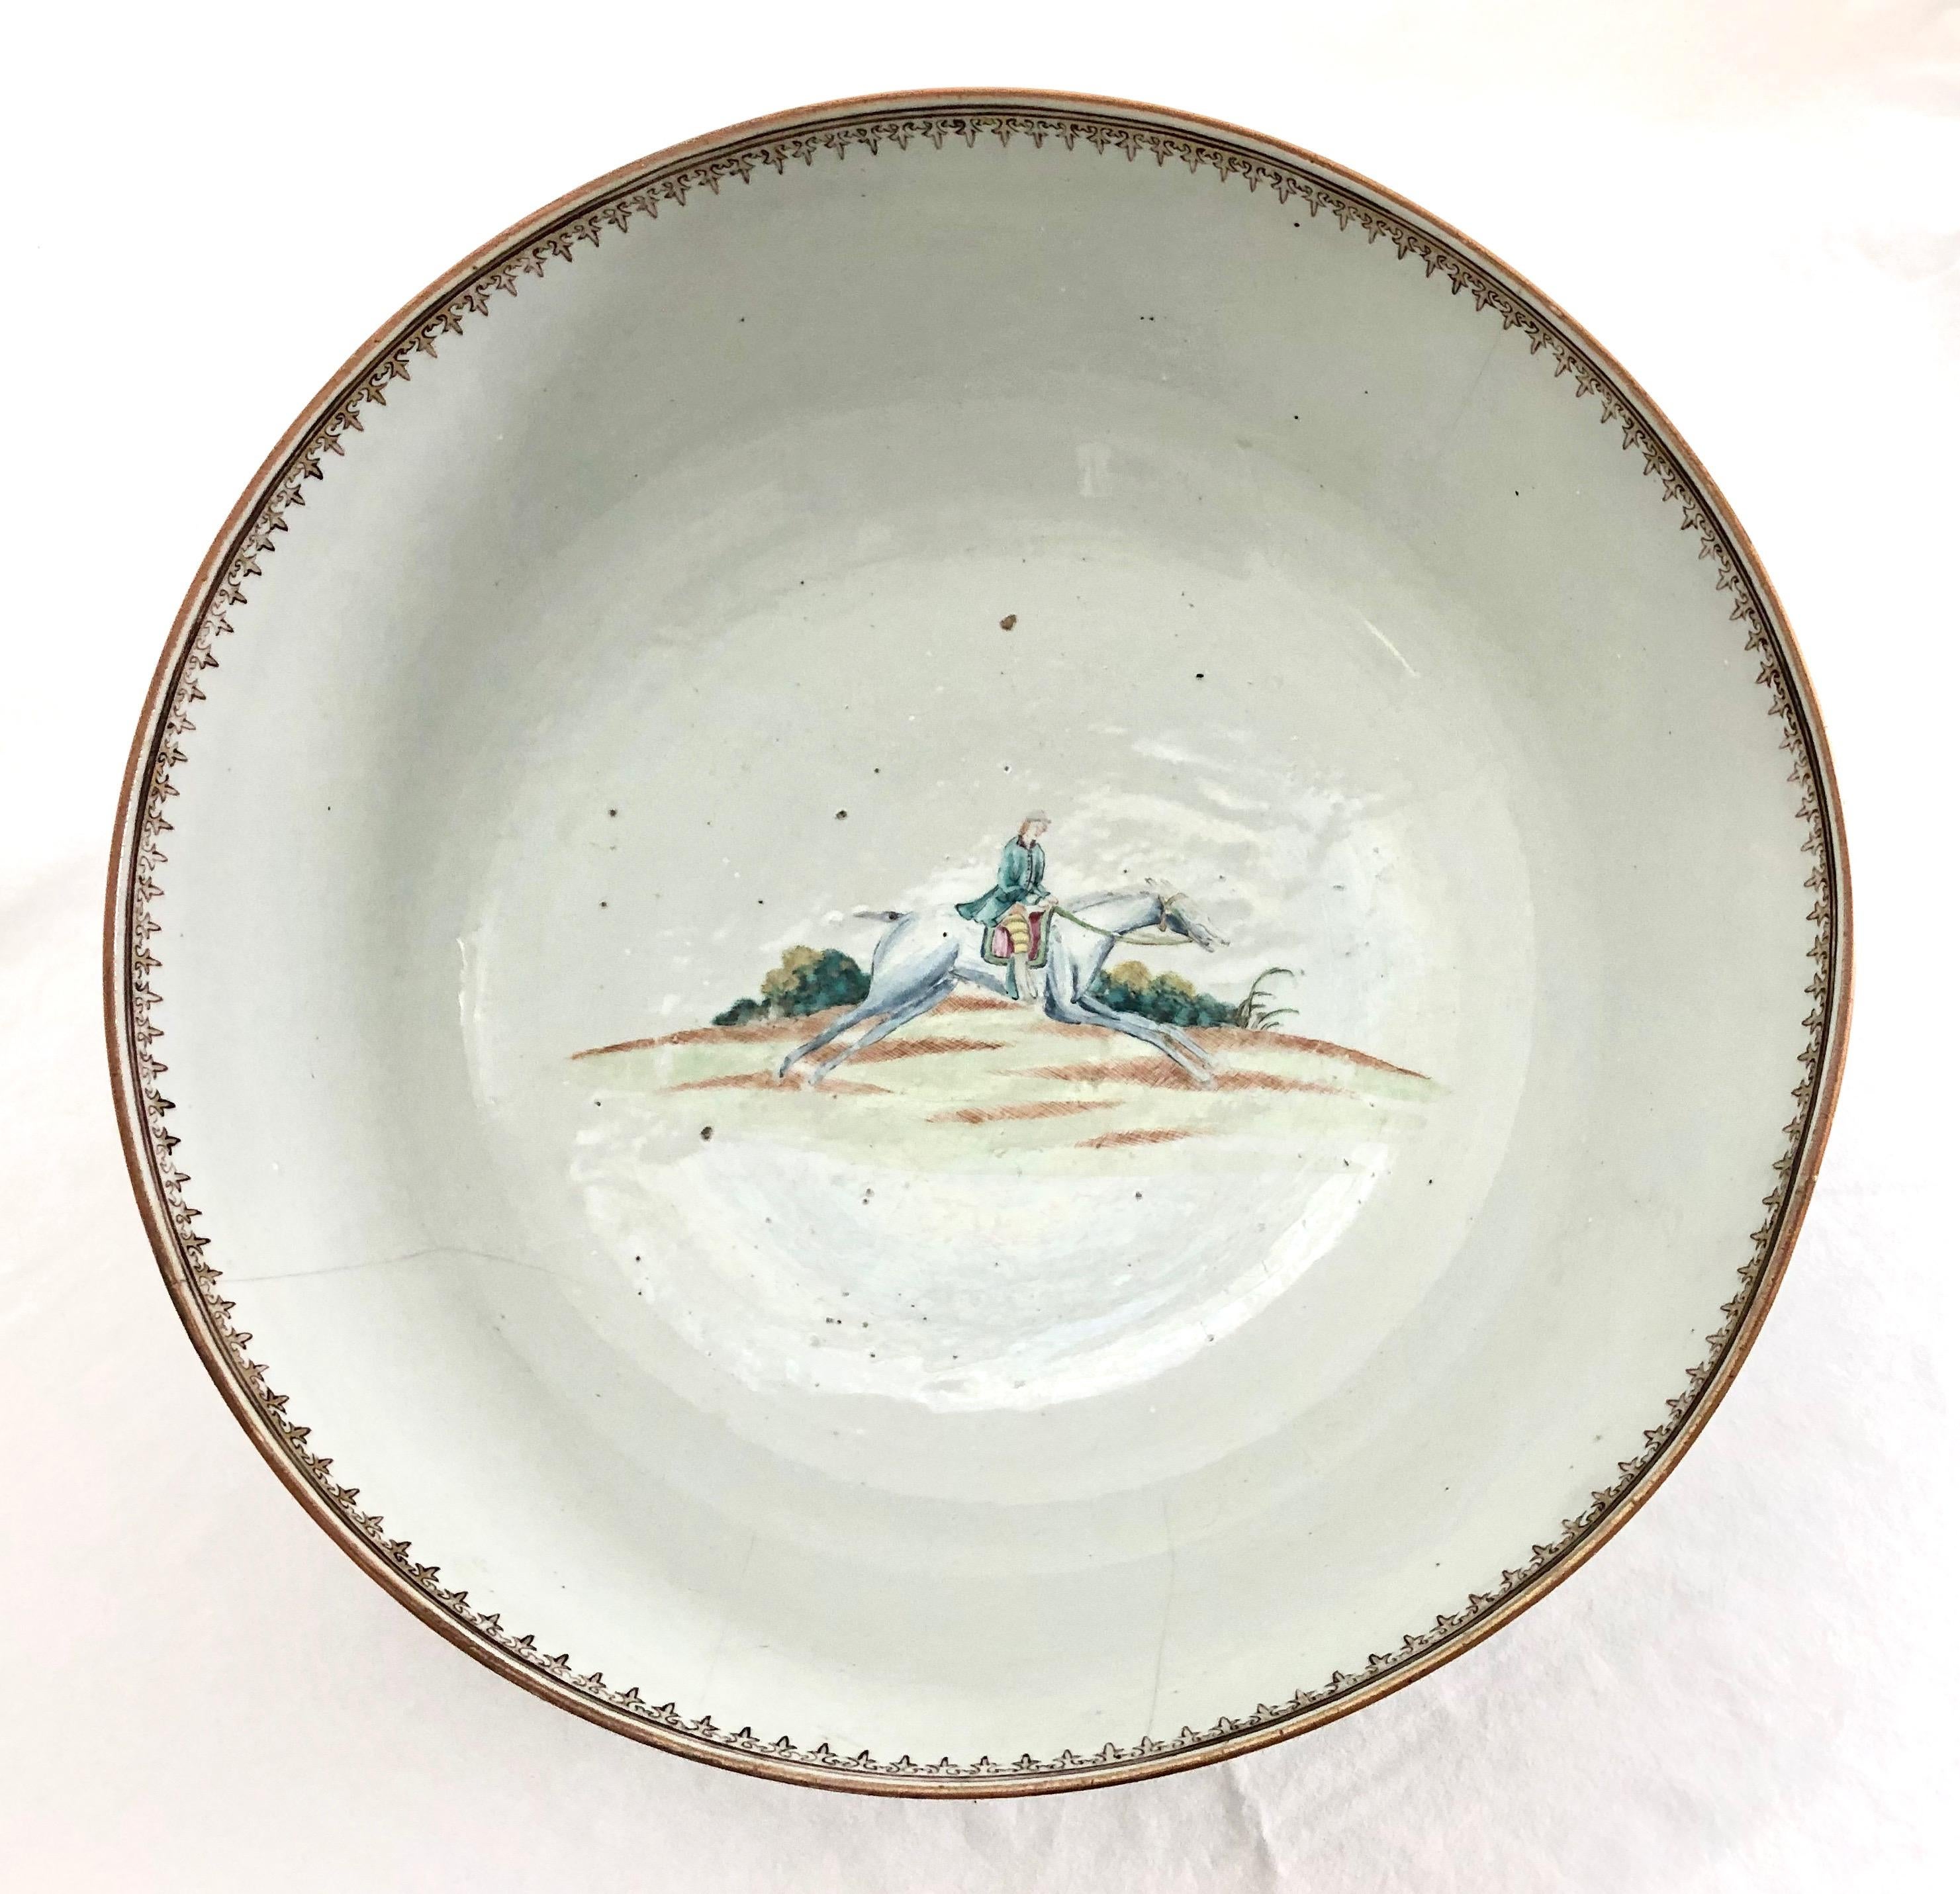 Extremely Rare 18th Century Chinese Export Porcelain Punch Bowl Fox Hunt Scene 2